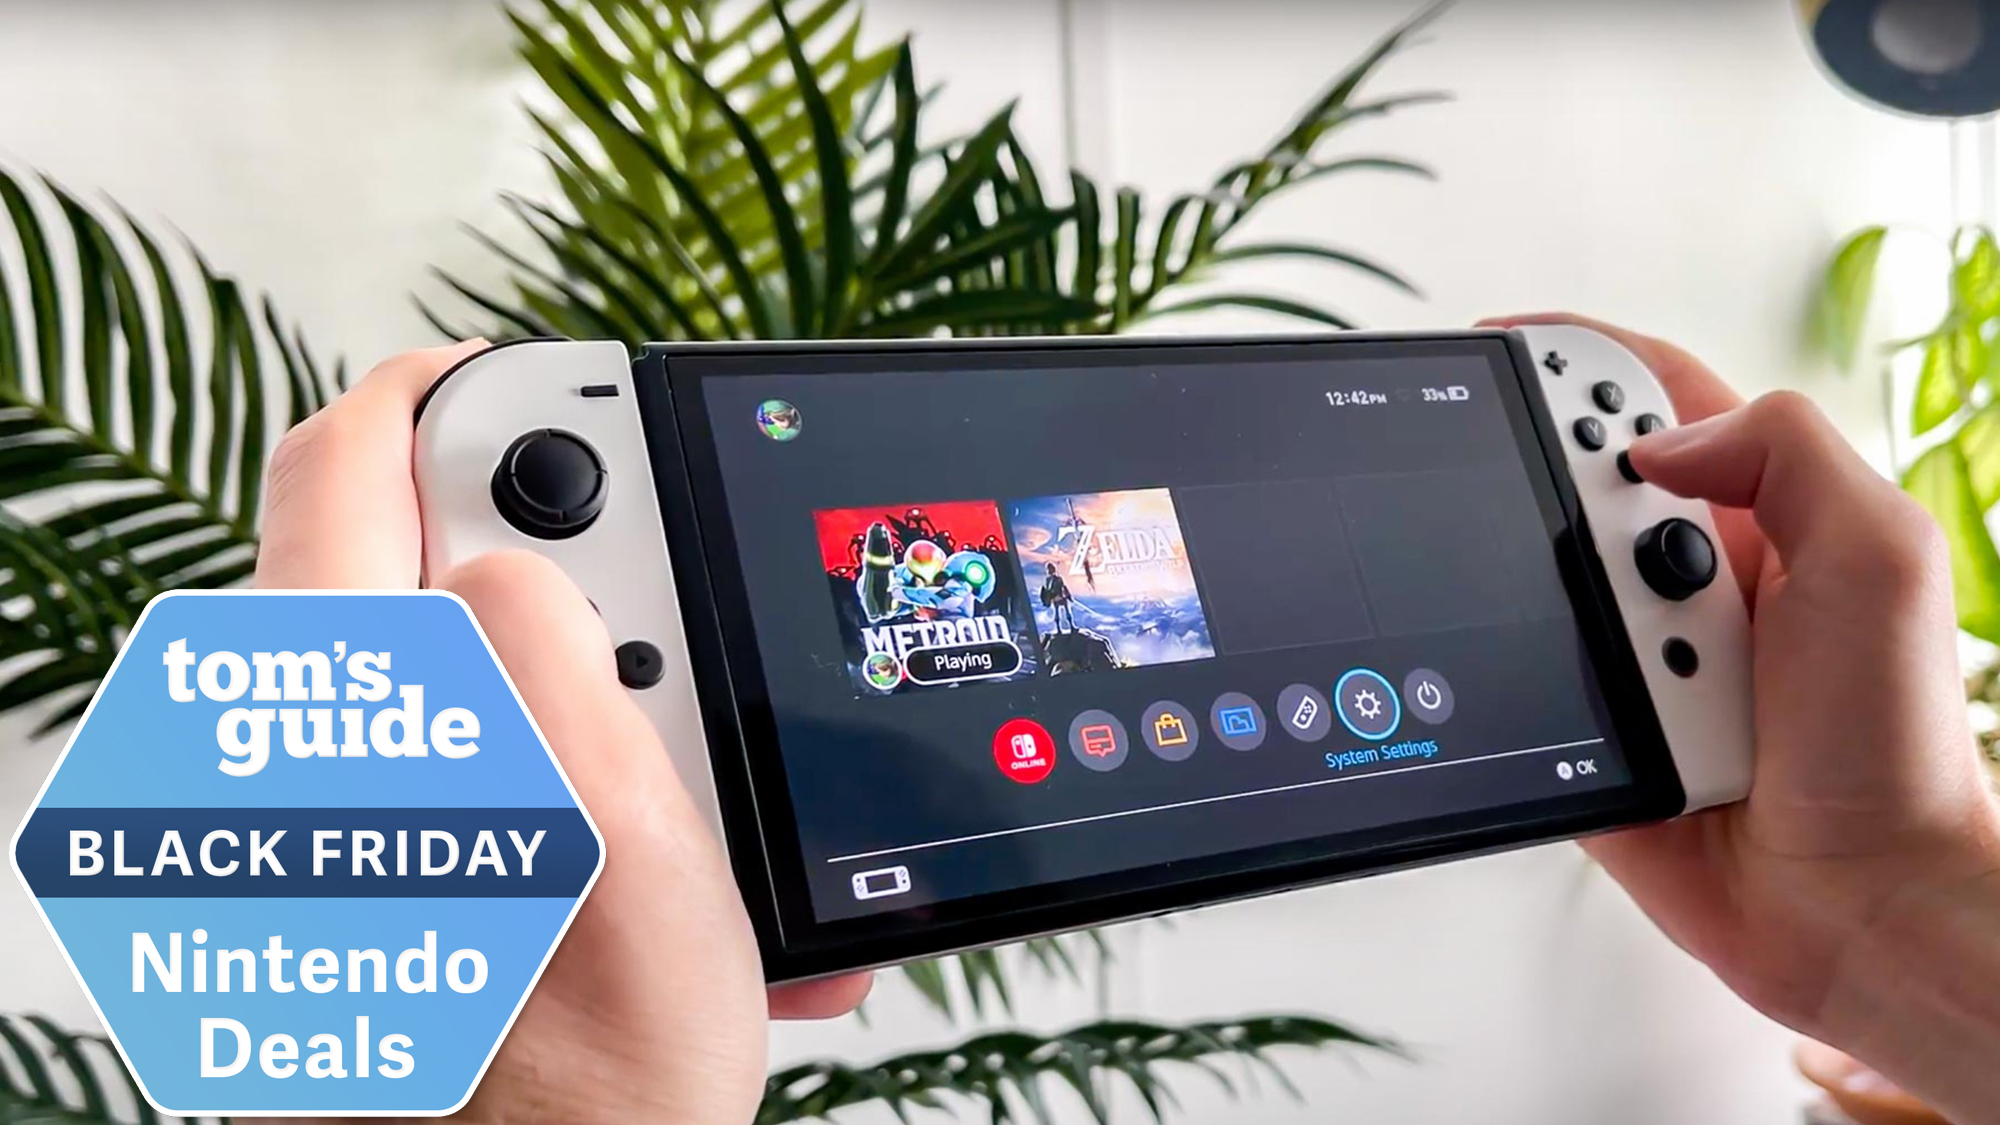 Nintendo Switch Black Friday deals — the 9 best deals on Switch